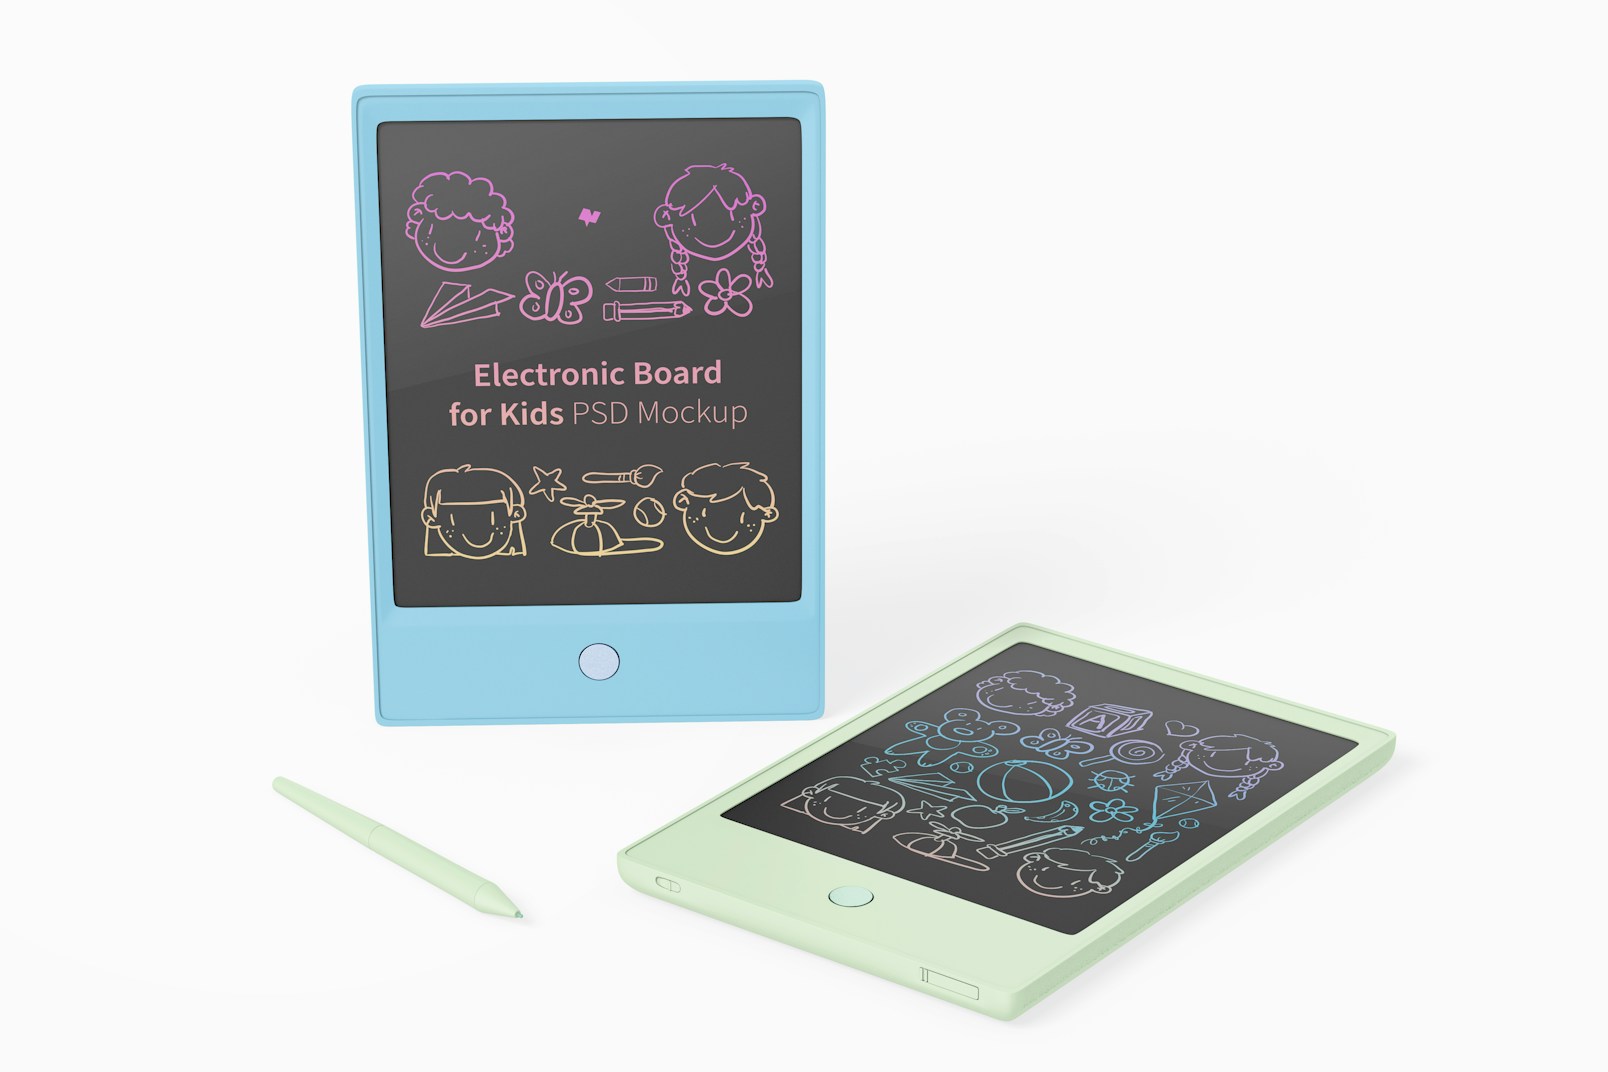 Electronic Boards for Kids Mockup, Standing and Dropped